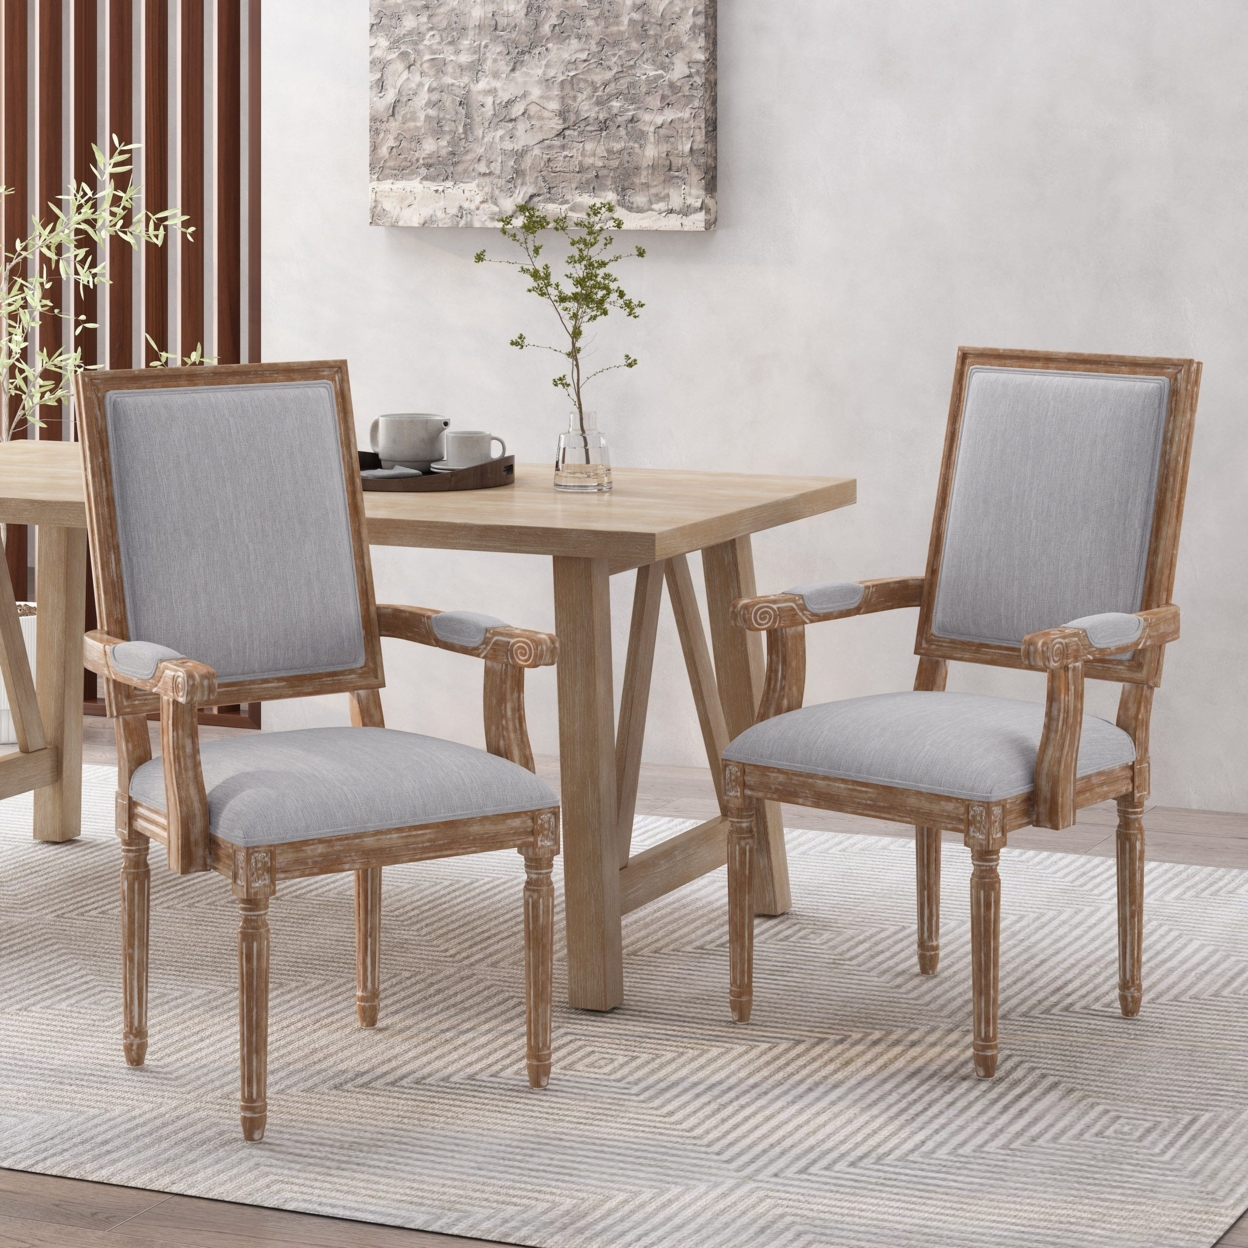 Zentner French Country Wood Upholstered Dining Chair - Gray/light Grey, Set Of 2